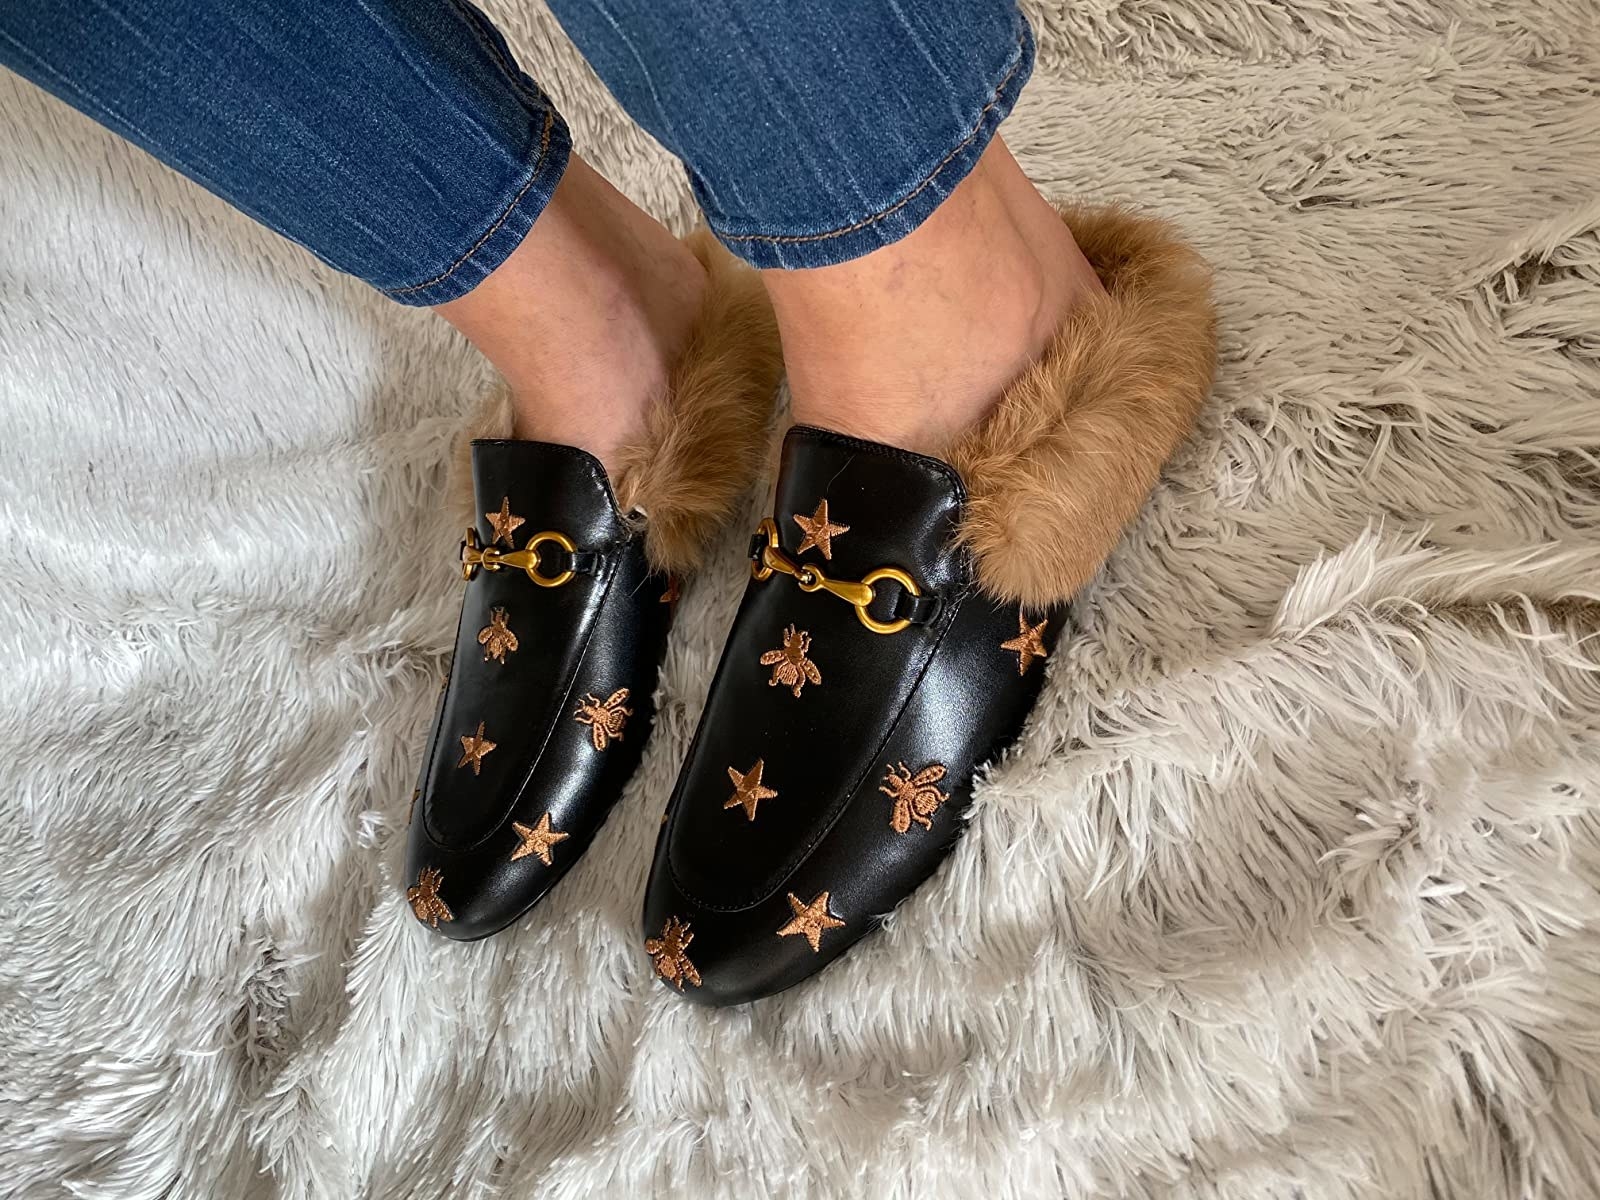 Reviewer wearing black loafer with brown embroidery design and fur heel